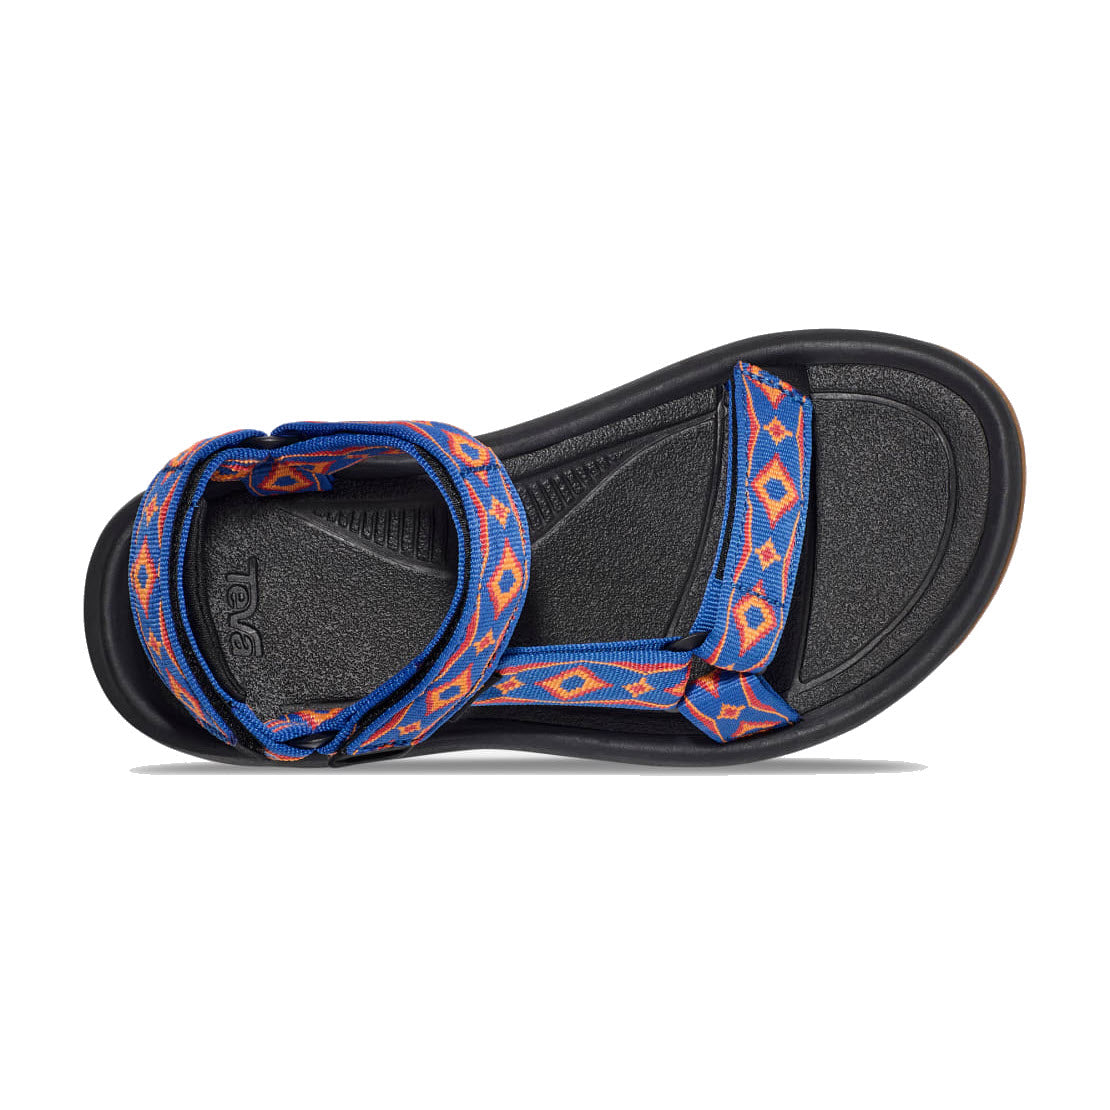 A single Teva TEVA HURRICANE XLT2 90S ARCHIVAL REVIVAL - WOMENS sport sandal with blue and orange heritage strap designs on a white background.